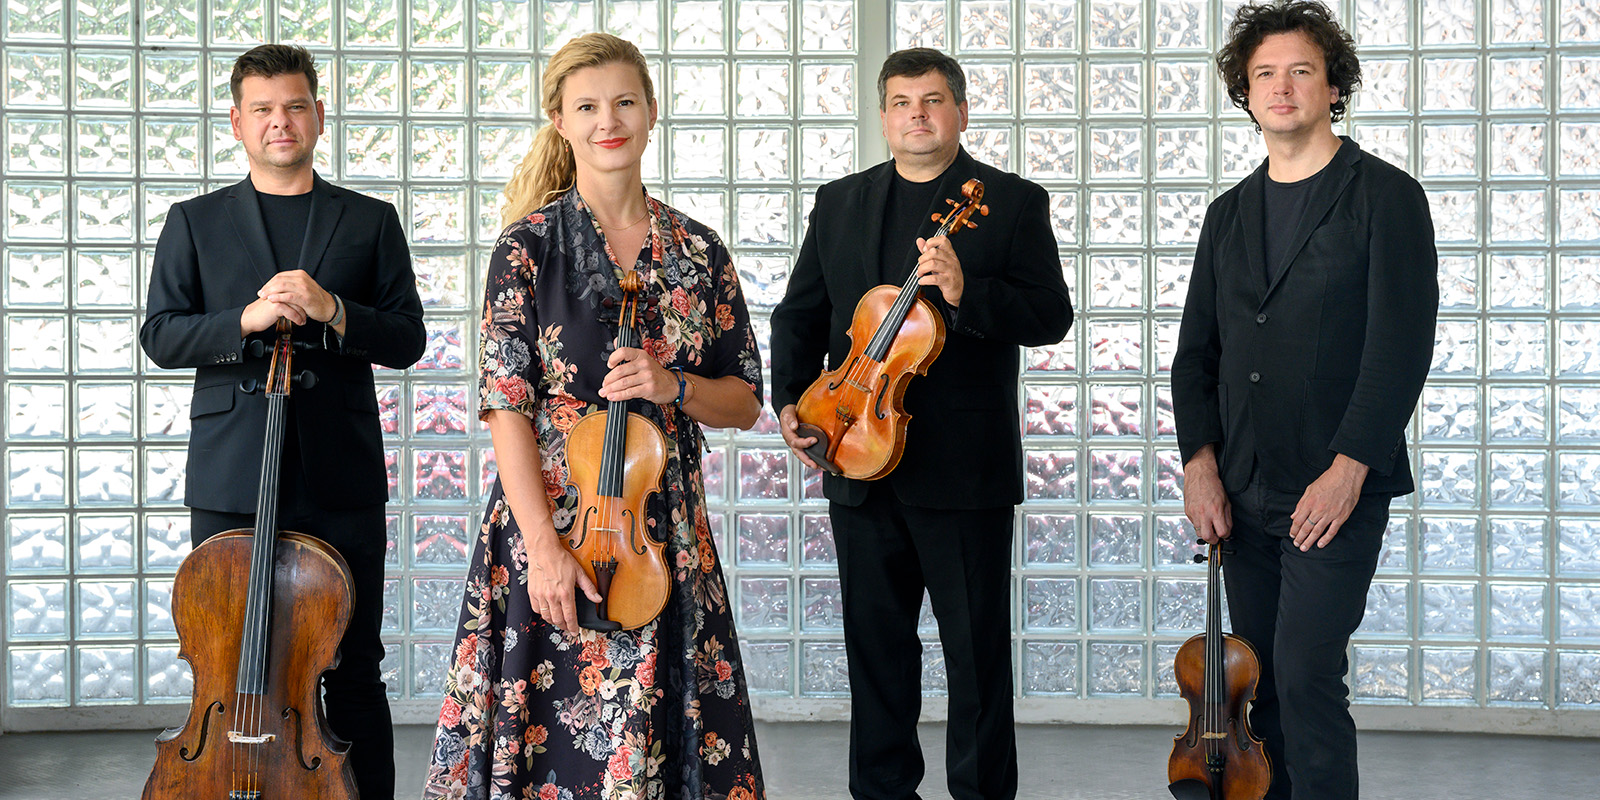 Four musicians hold string instruments while standing in front of a glass wall